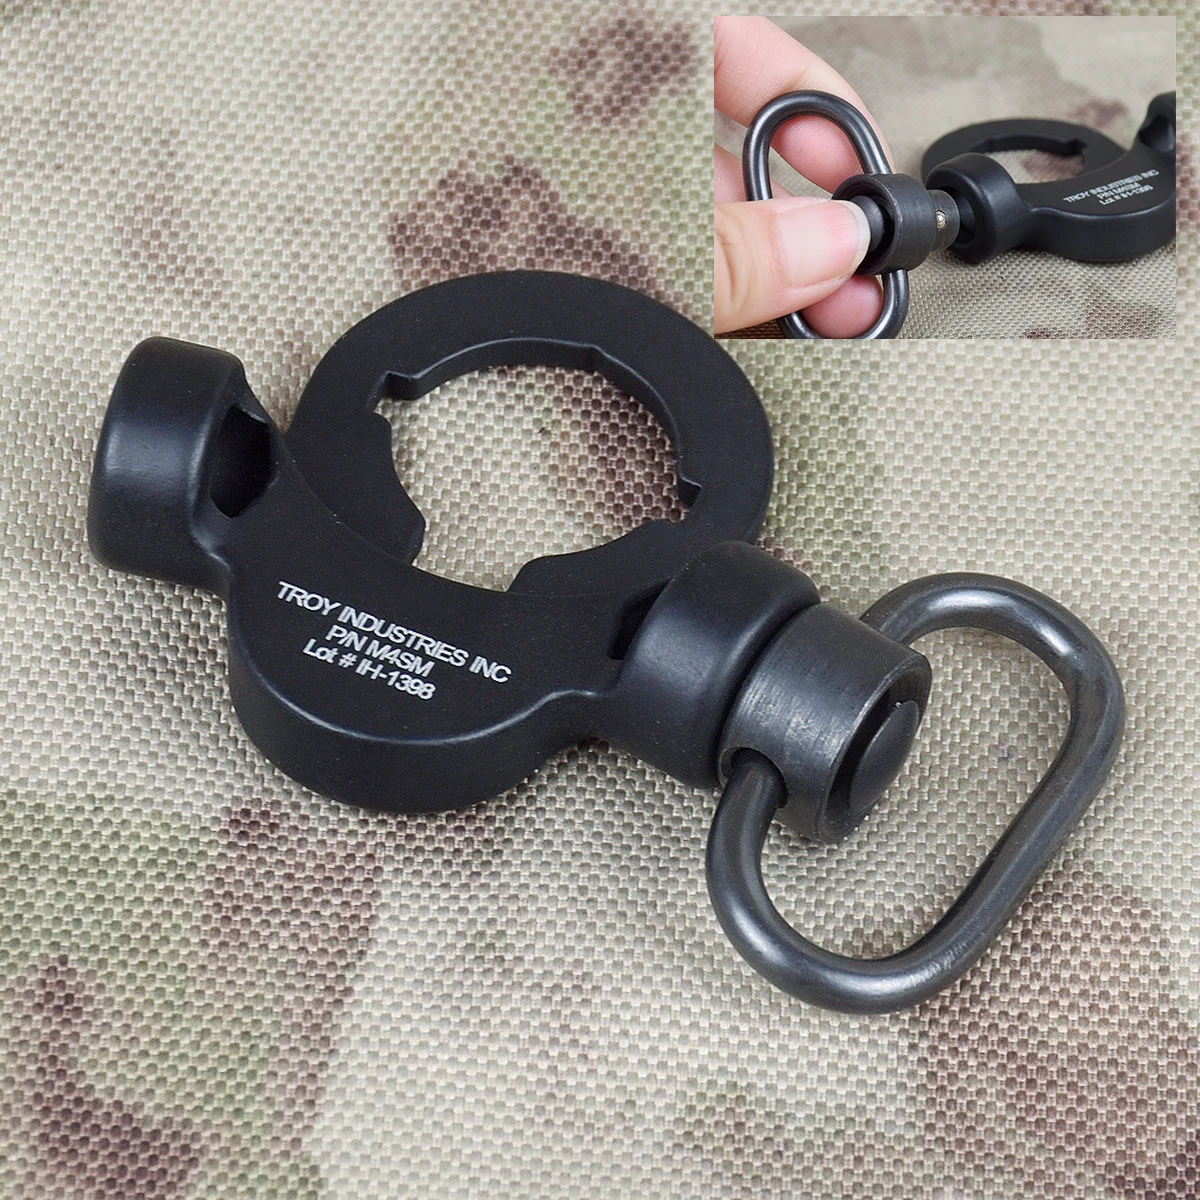 

Hunting Detach Push Botton Adapter Fit With Dual Side End Plate Flexible Scope Mounts Sling Swivel For M4 M16 Airsoft